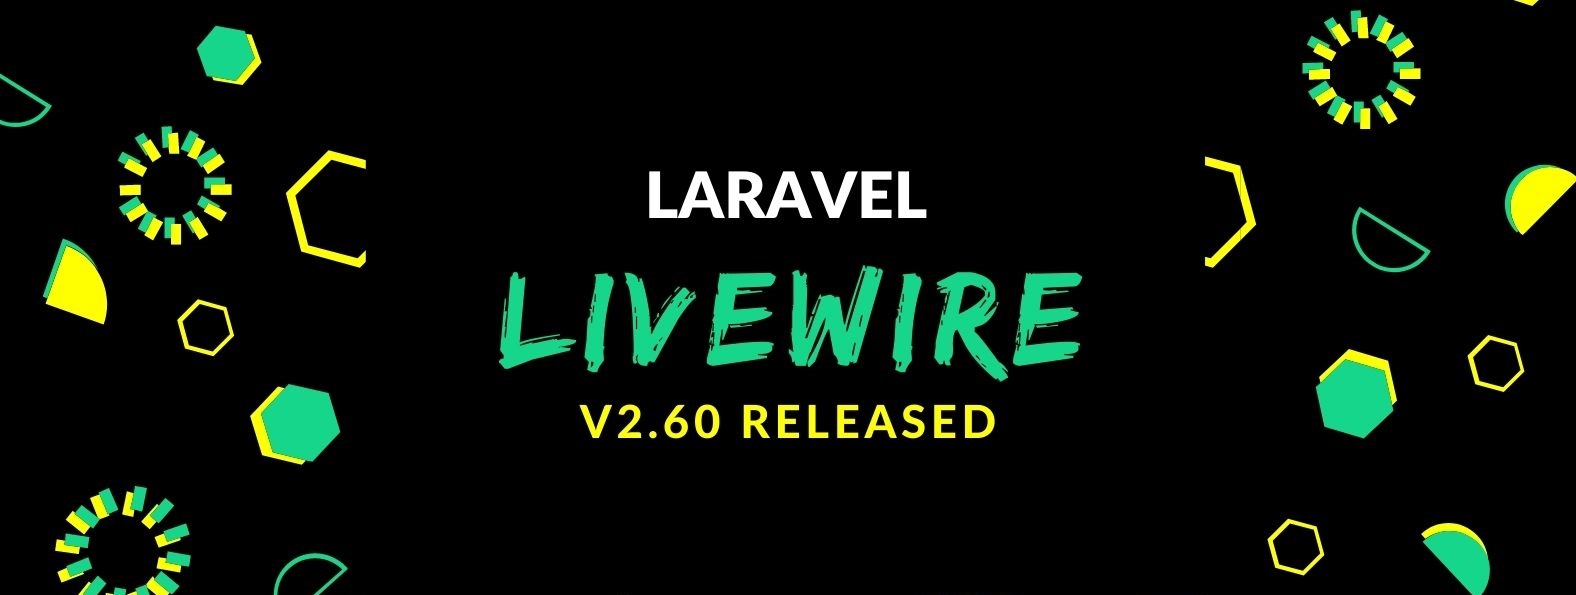 What's new in Laravel Livewire v2.6 | Livewire v2.6 Released cover image